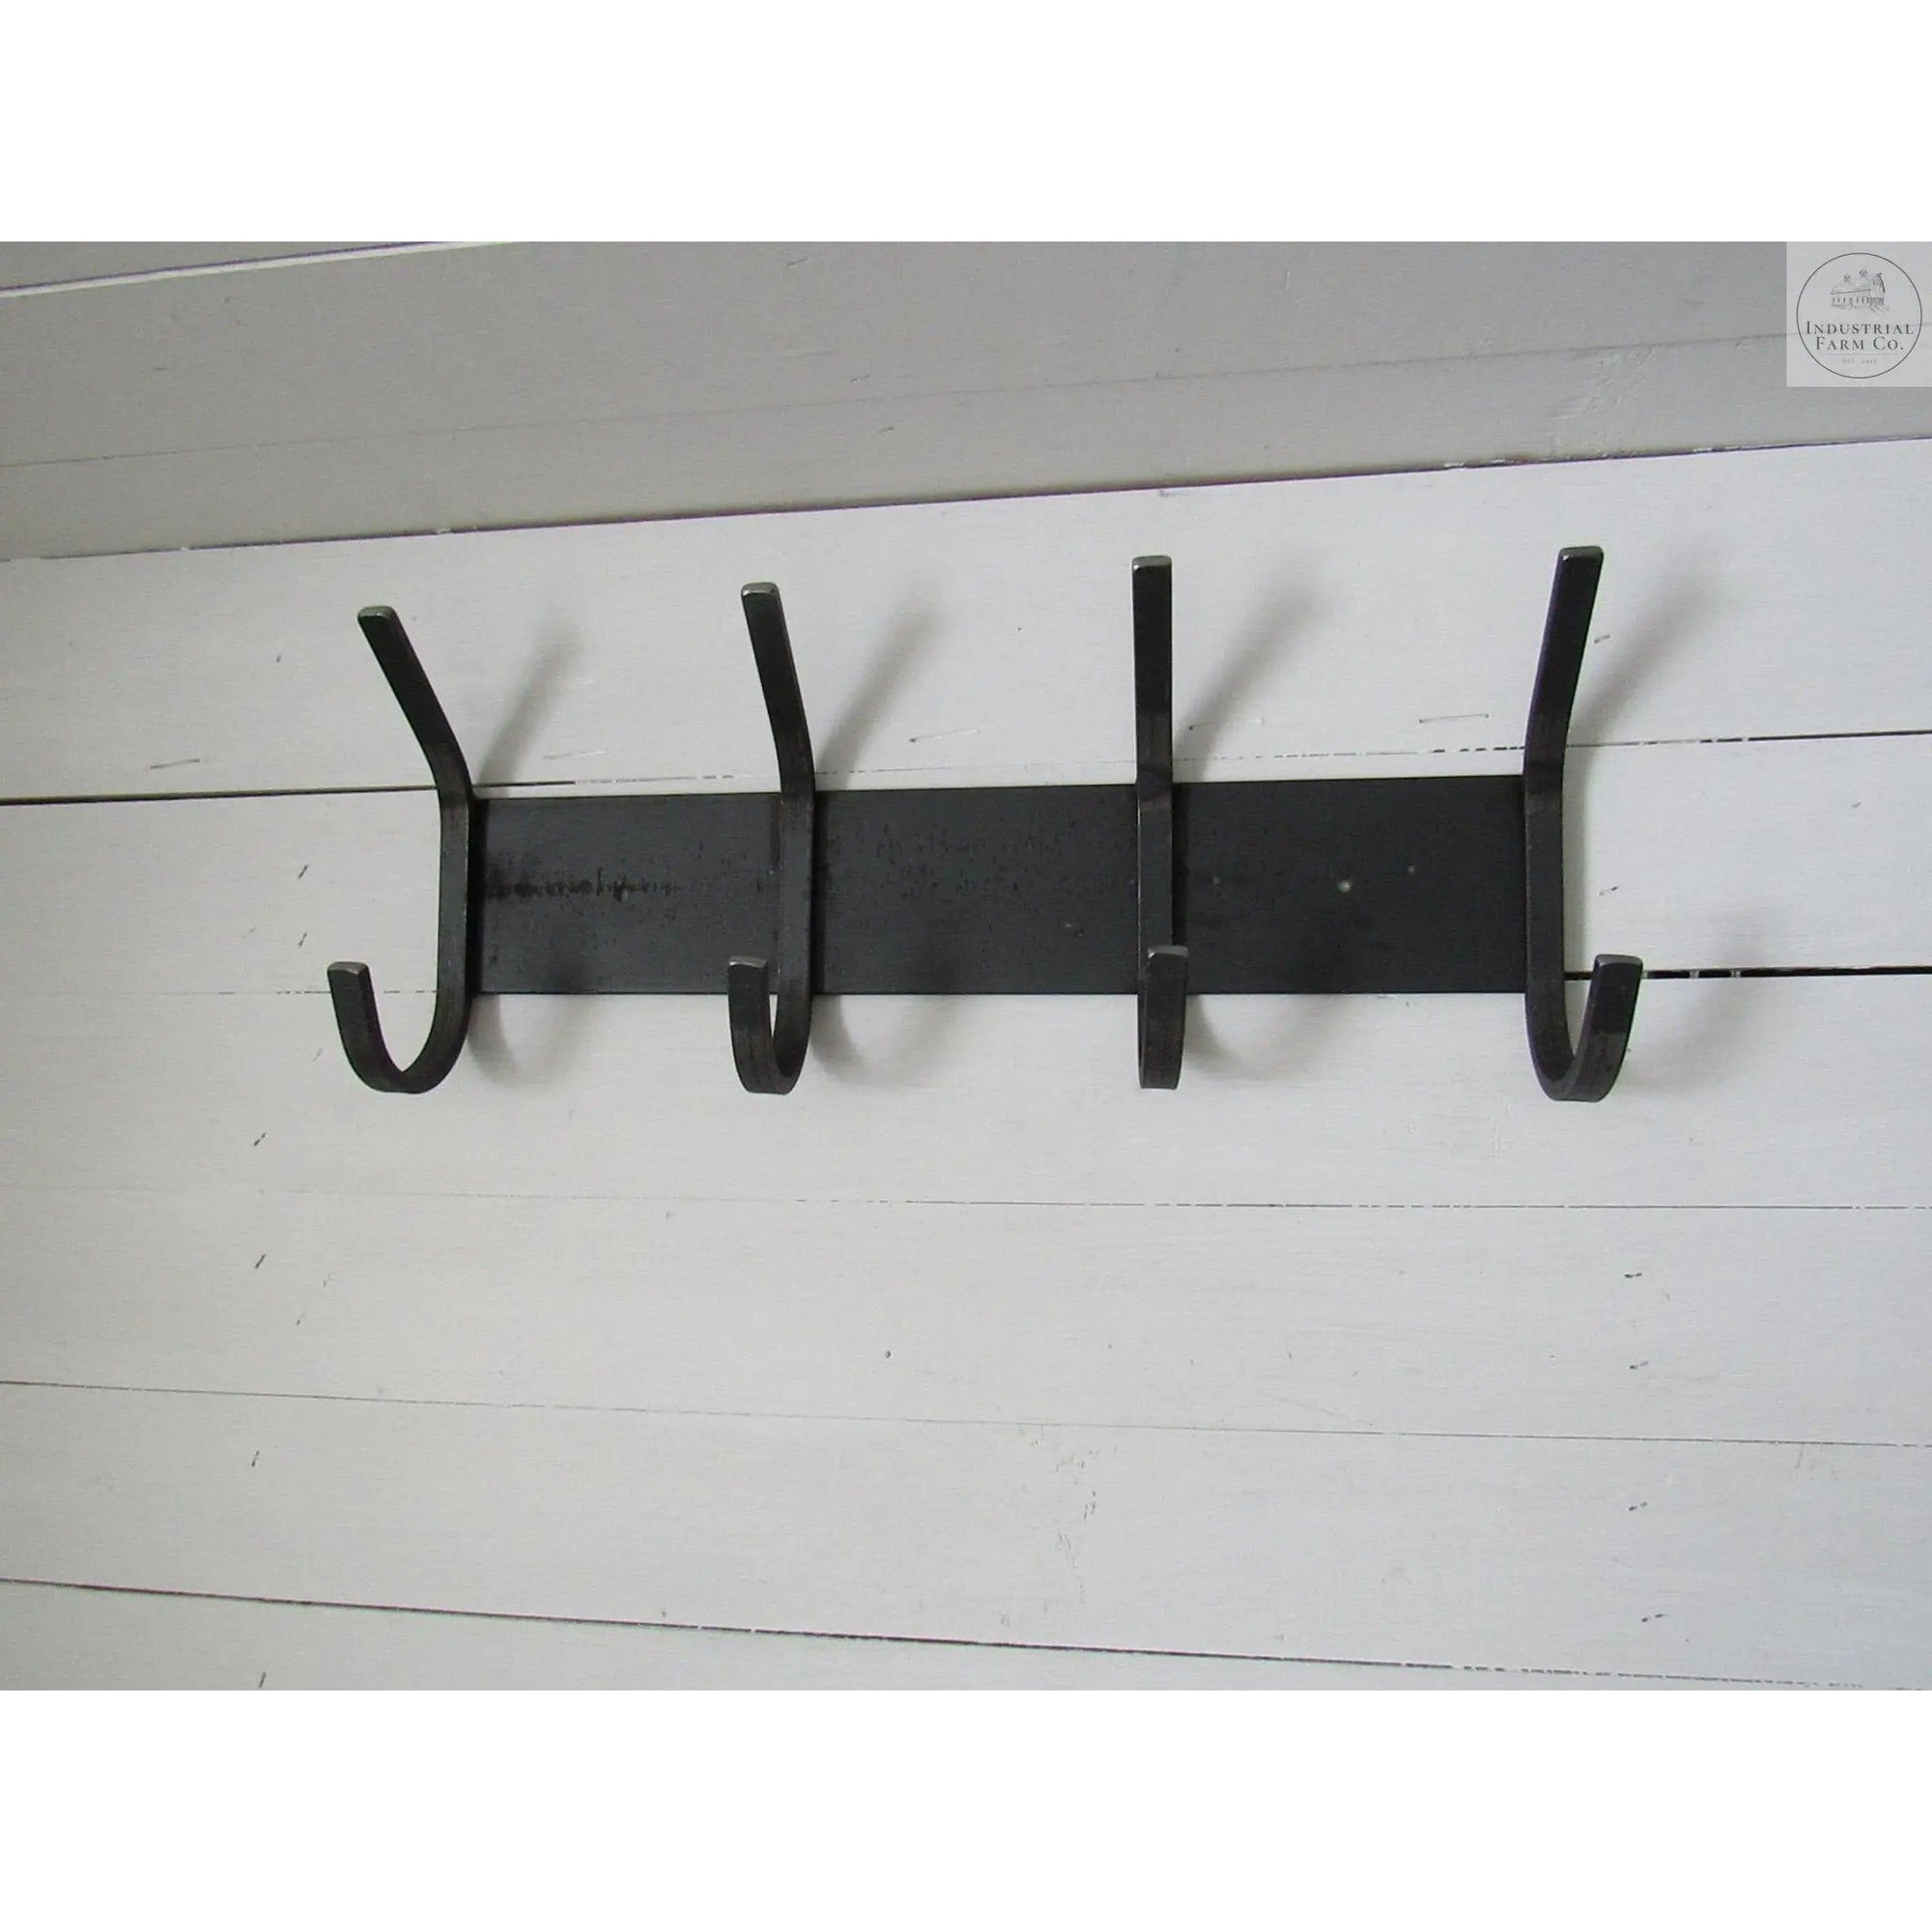 The Cooperstown Double Hook Coat Rack Coat Rack 14" Wall Mount Length Finish Gold Powder Coat | Industrial Farm Co